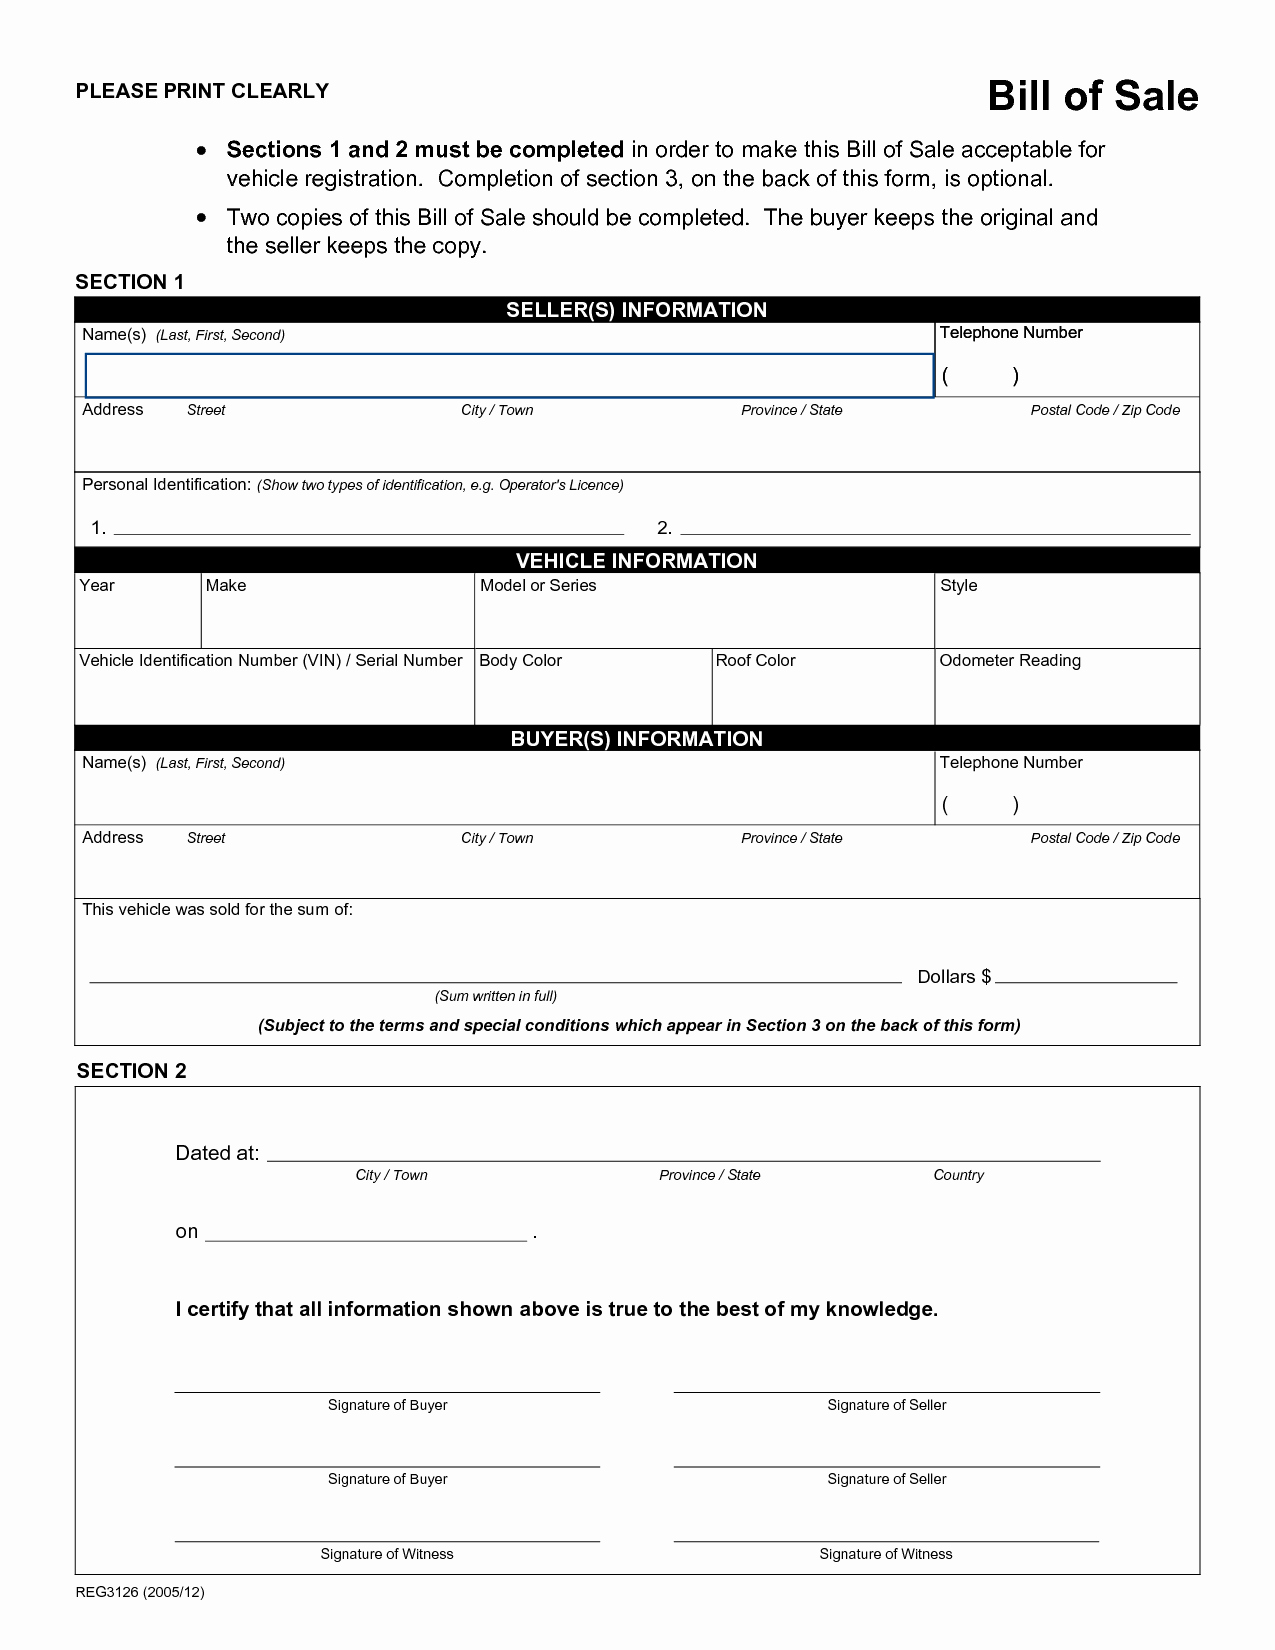 Bill Of Sale form Automobile New Free Printable Auto Bill Of Sale form Generic